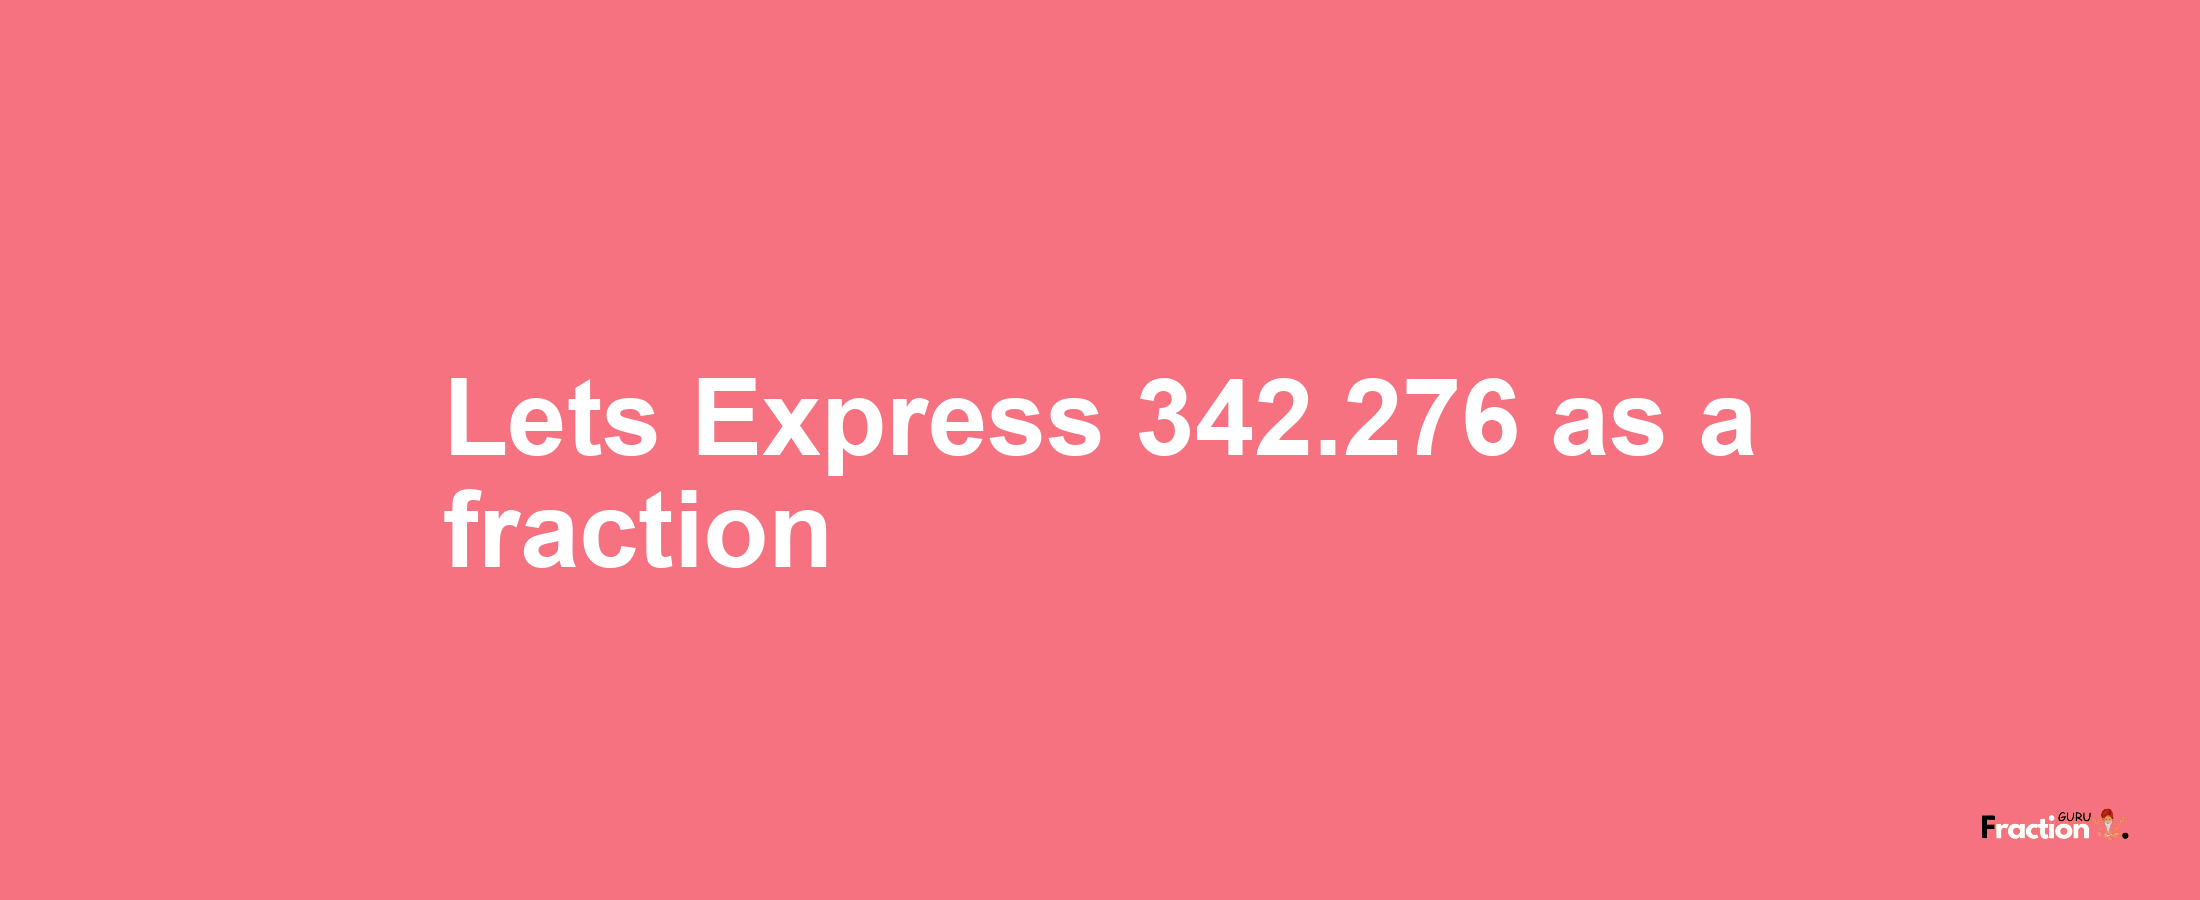 Lets Express 342.276 as afraction